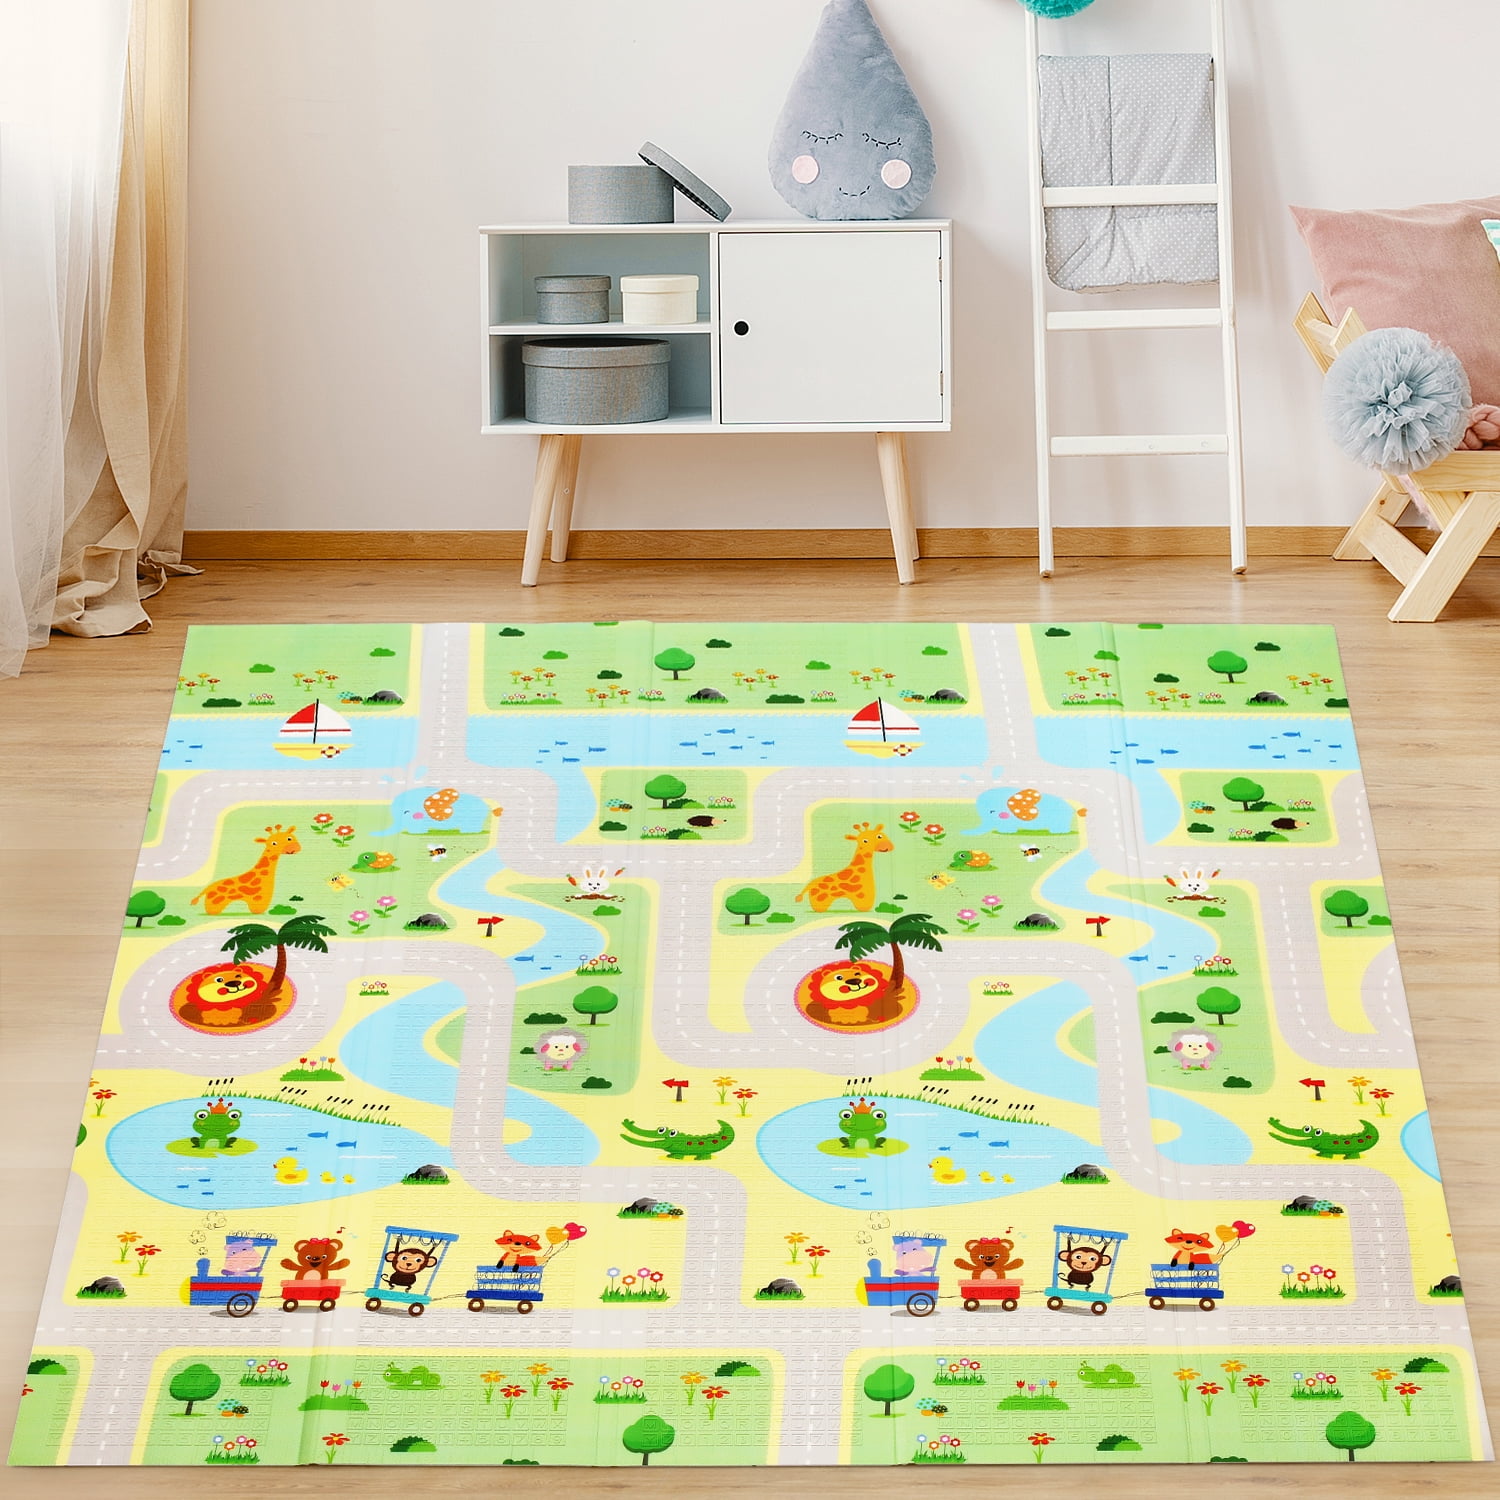 BABY PLAY MAT: Foldable, Padded Floor Mat for Crawling, Playing, and  Toddler Playroom | Baby Care Foam Mat | Extra-Large Floor Mats For Kids |  Playpen